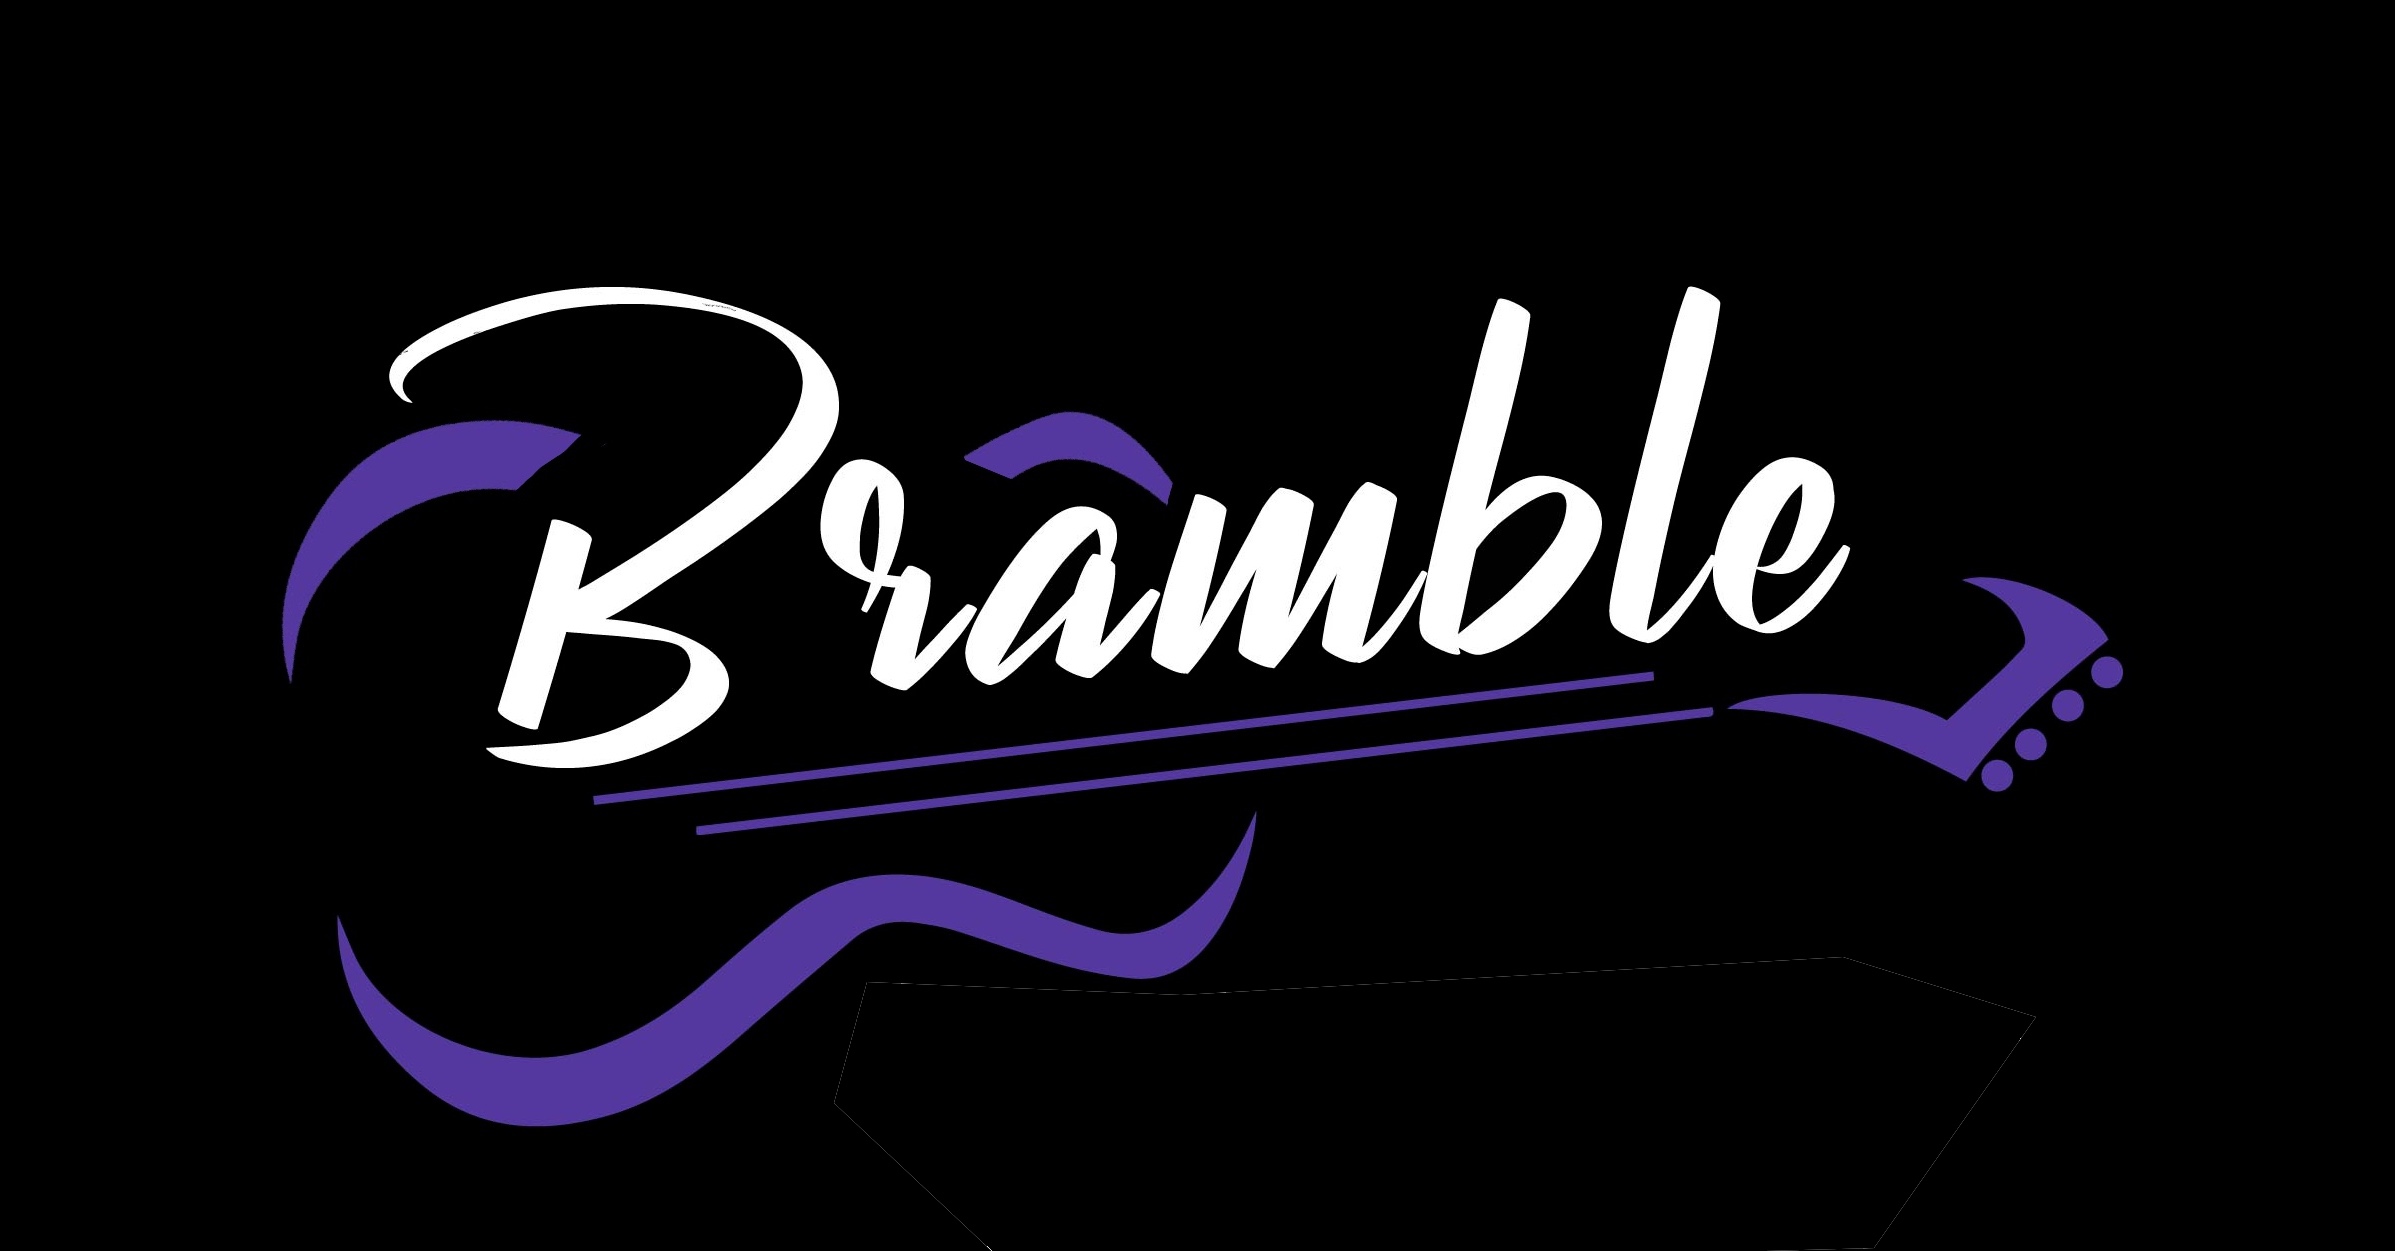 A logo showing the name Bramble set into a purple, abstract guitar